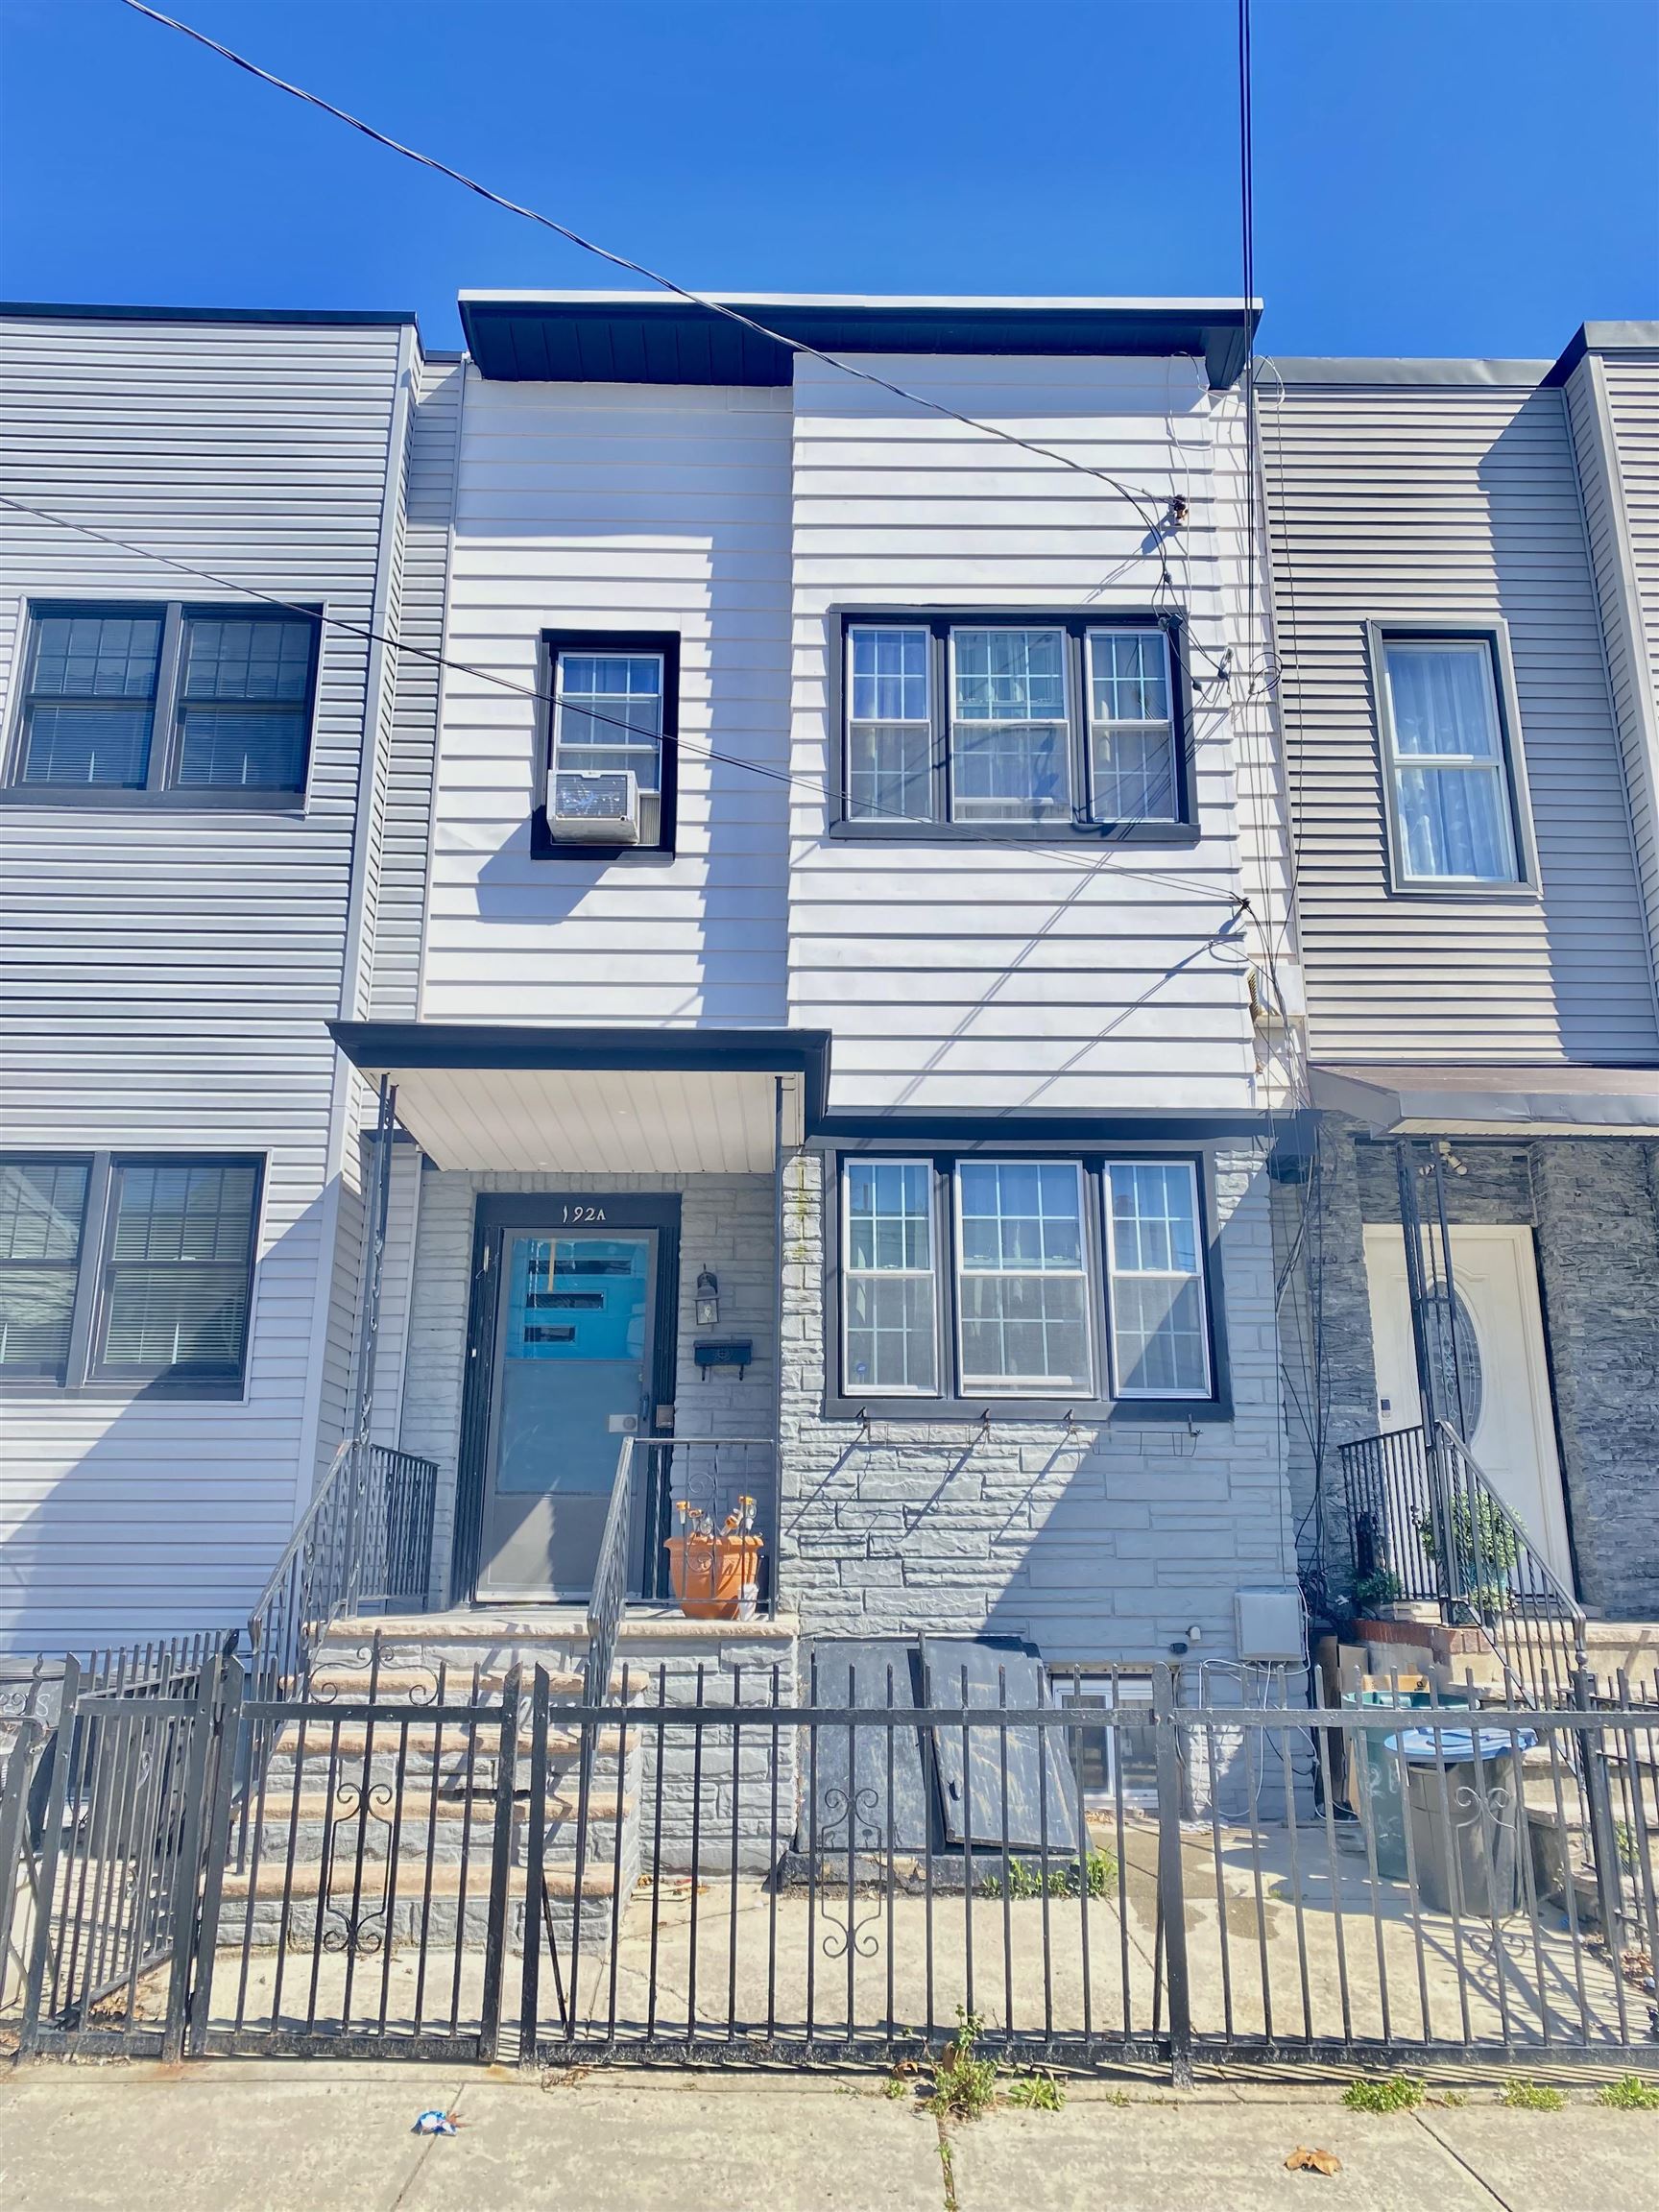 # 240005827 - For Rent in JERSEY CITY - Heights NJ